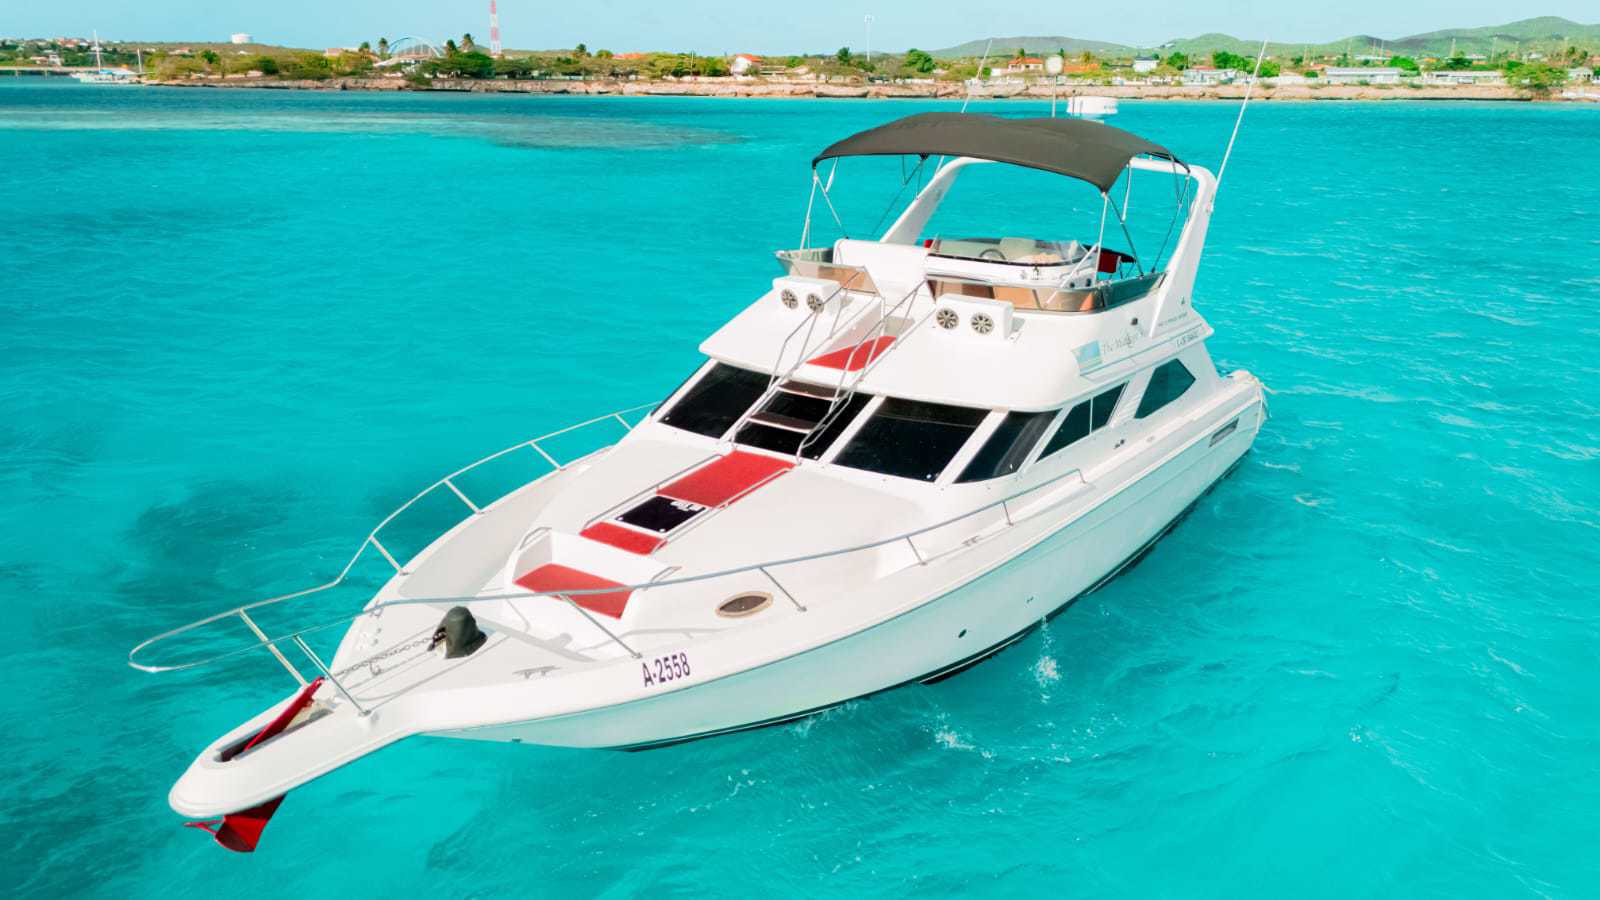 Luxury Yacht Rent for a Day | Private Yacht Rental for Couples